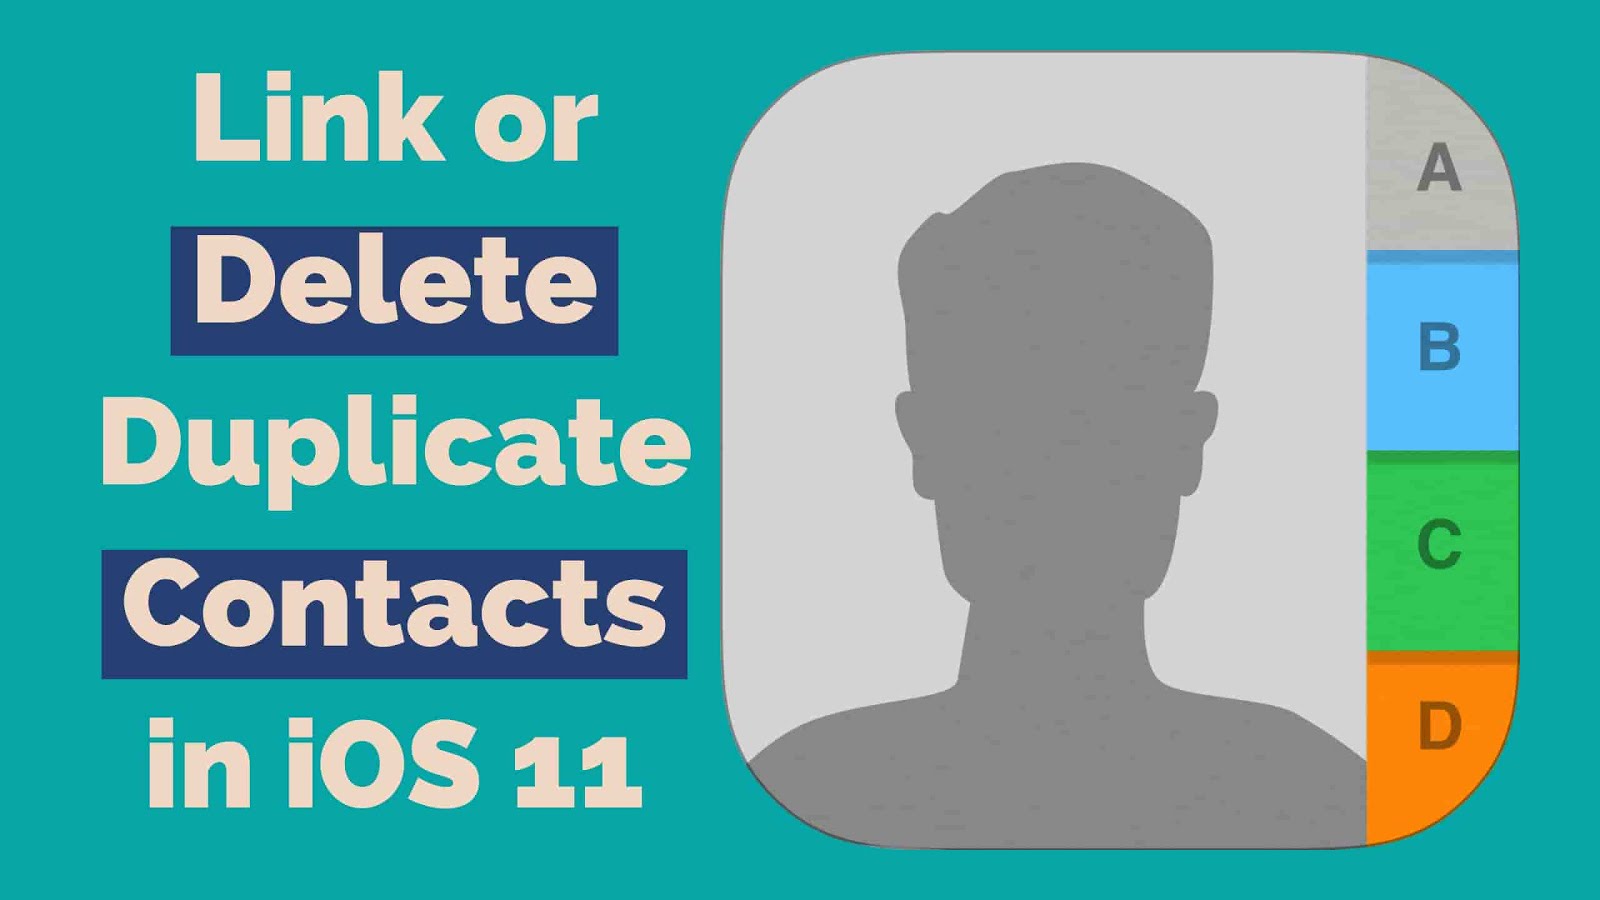 In this case, either you need to delete your duplicates contact one by one or link all your duplicates contacts with only one contact. Here’s how to delete or link duplicates contacts in iOS 11.